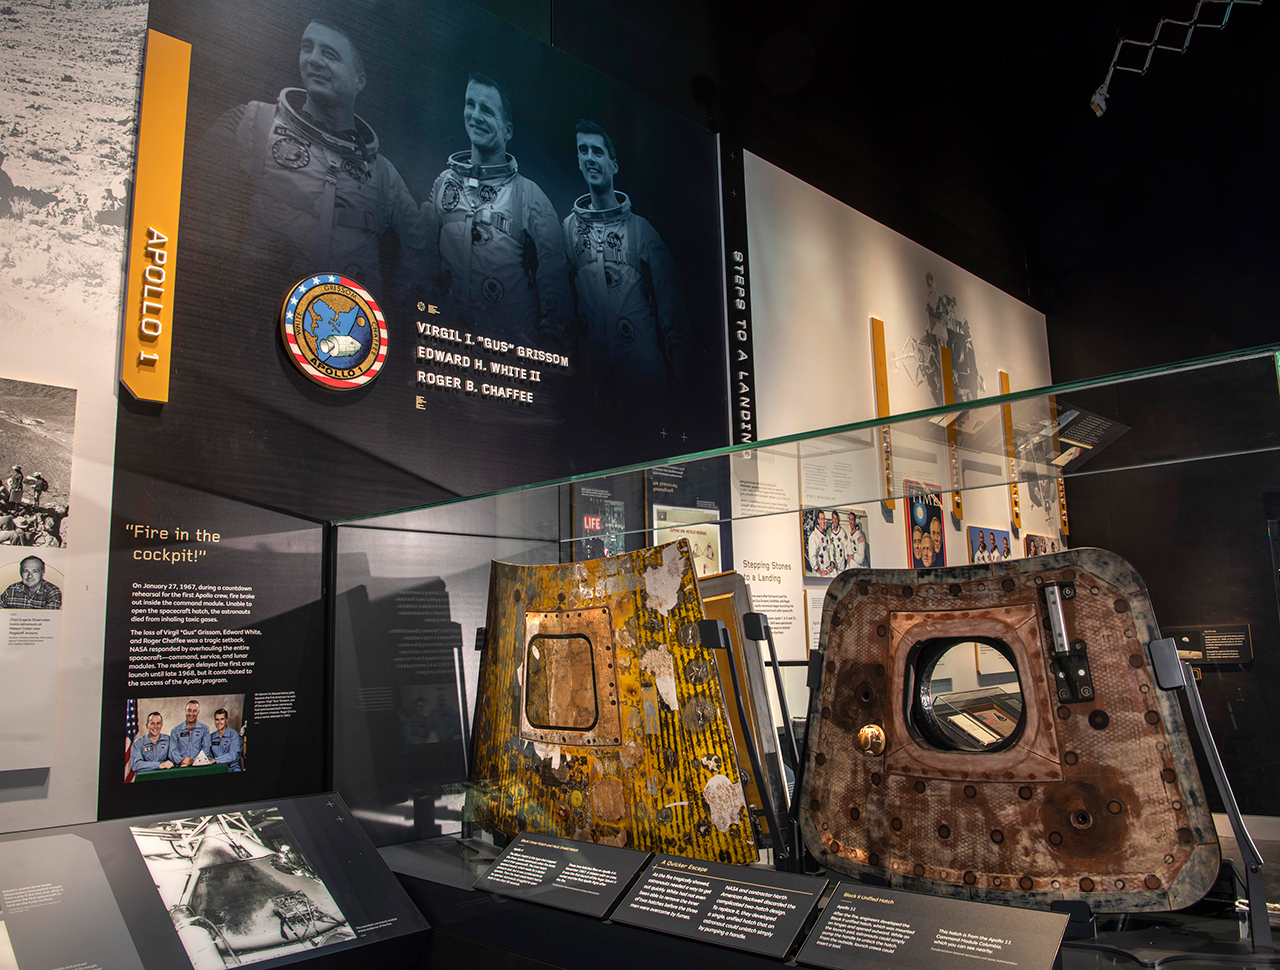 The Apollo 4 command module inner and heat shield hatches are on exhibit next to the Apollo 11 command module hatch in the 